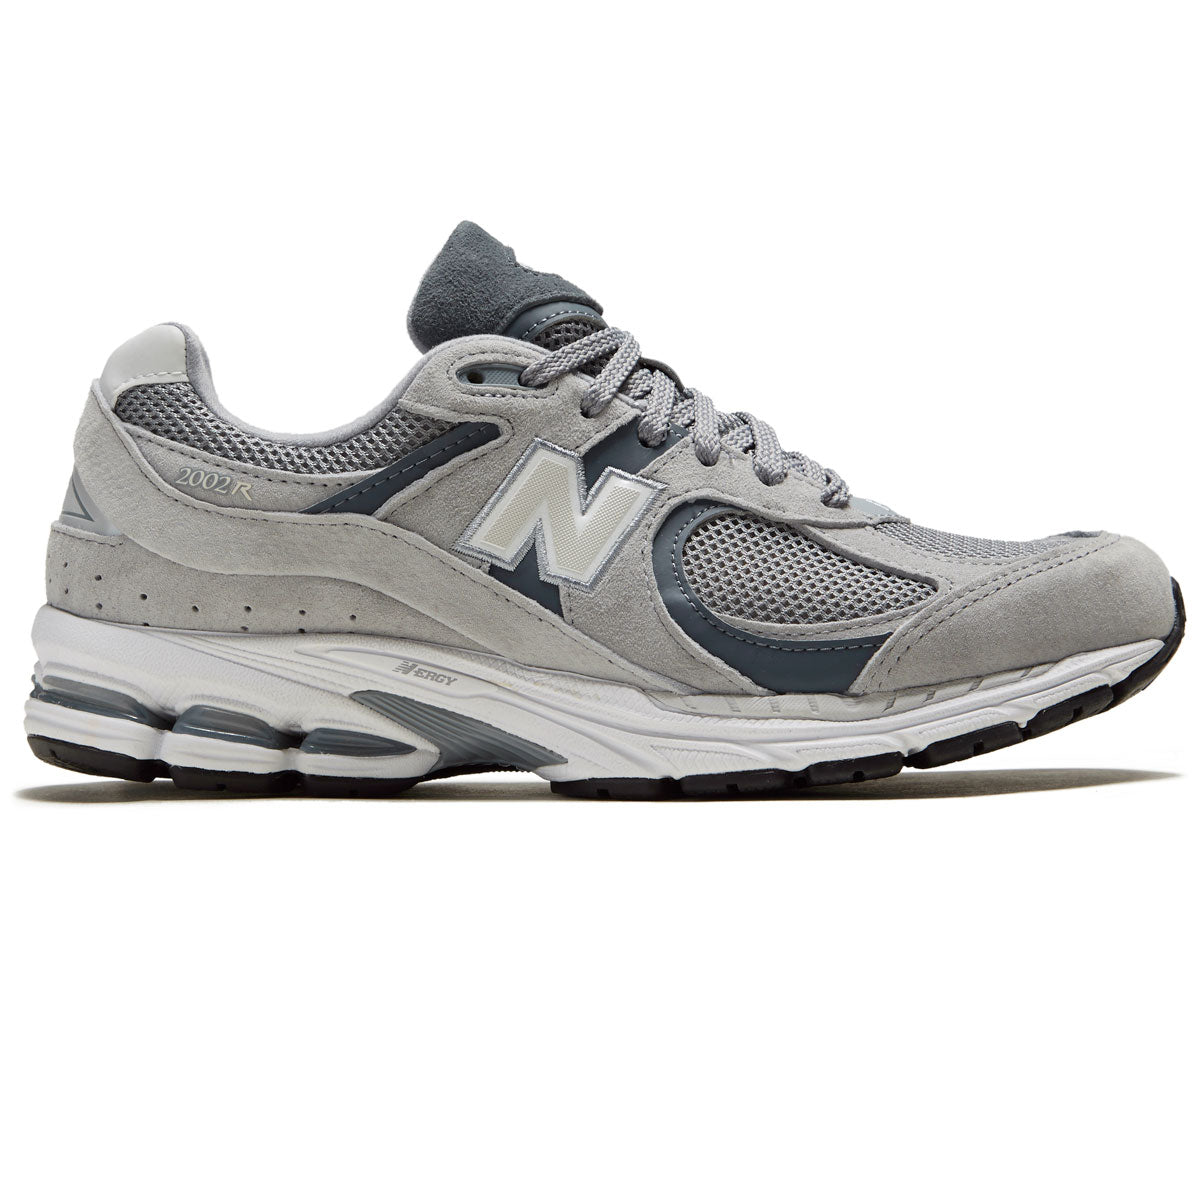 New Balance 2002R Shoes - Steel/Lead/Orca/ Silver Mink image 1